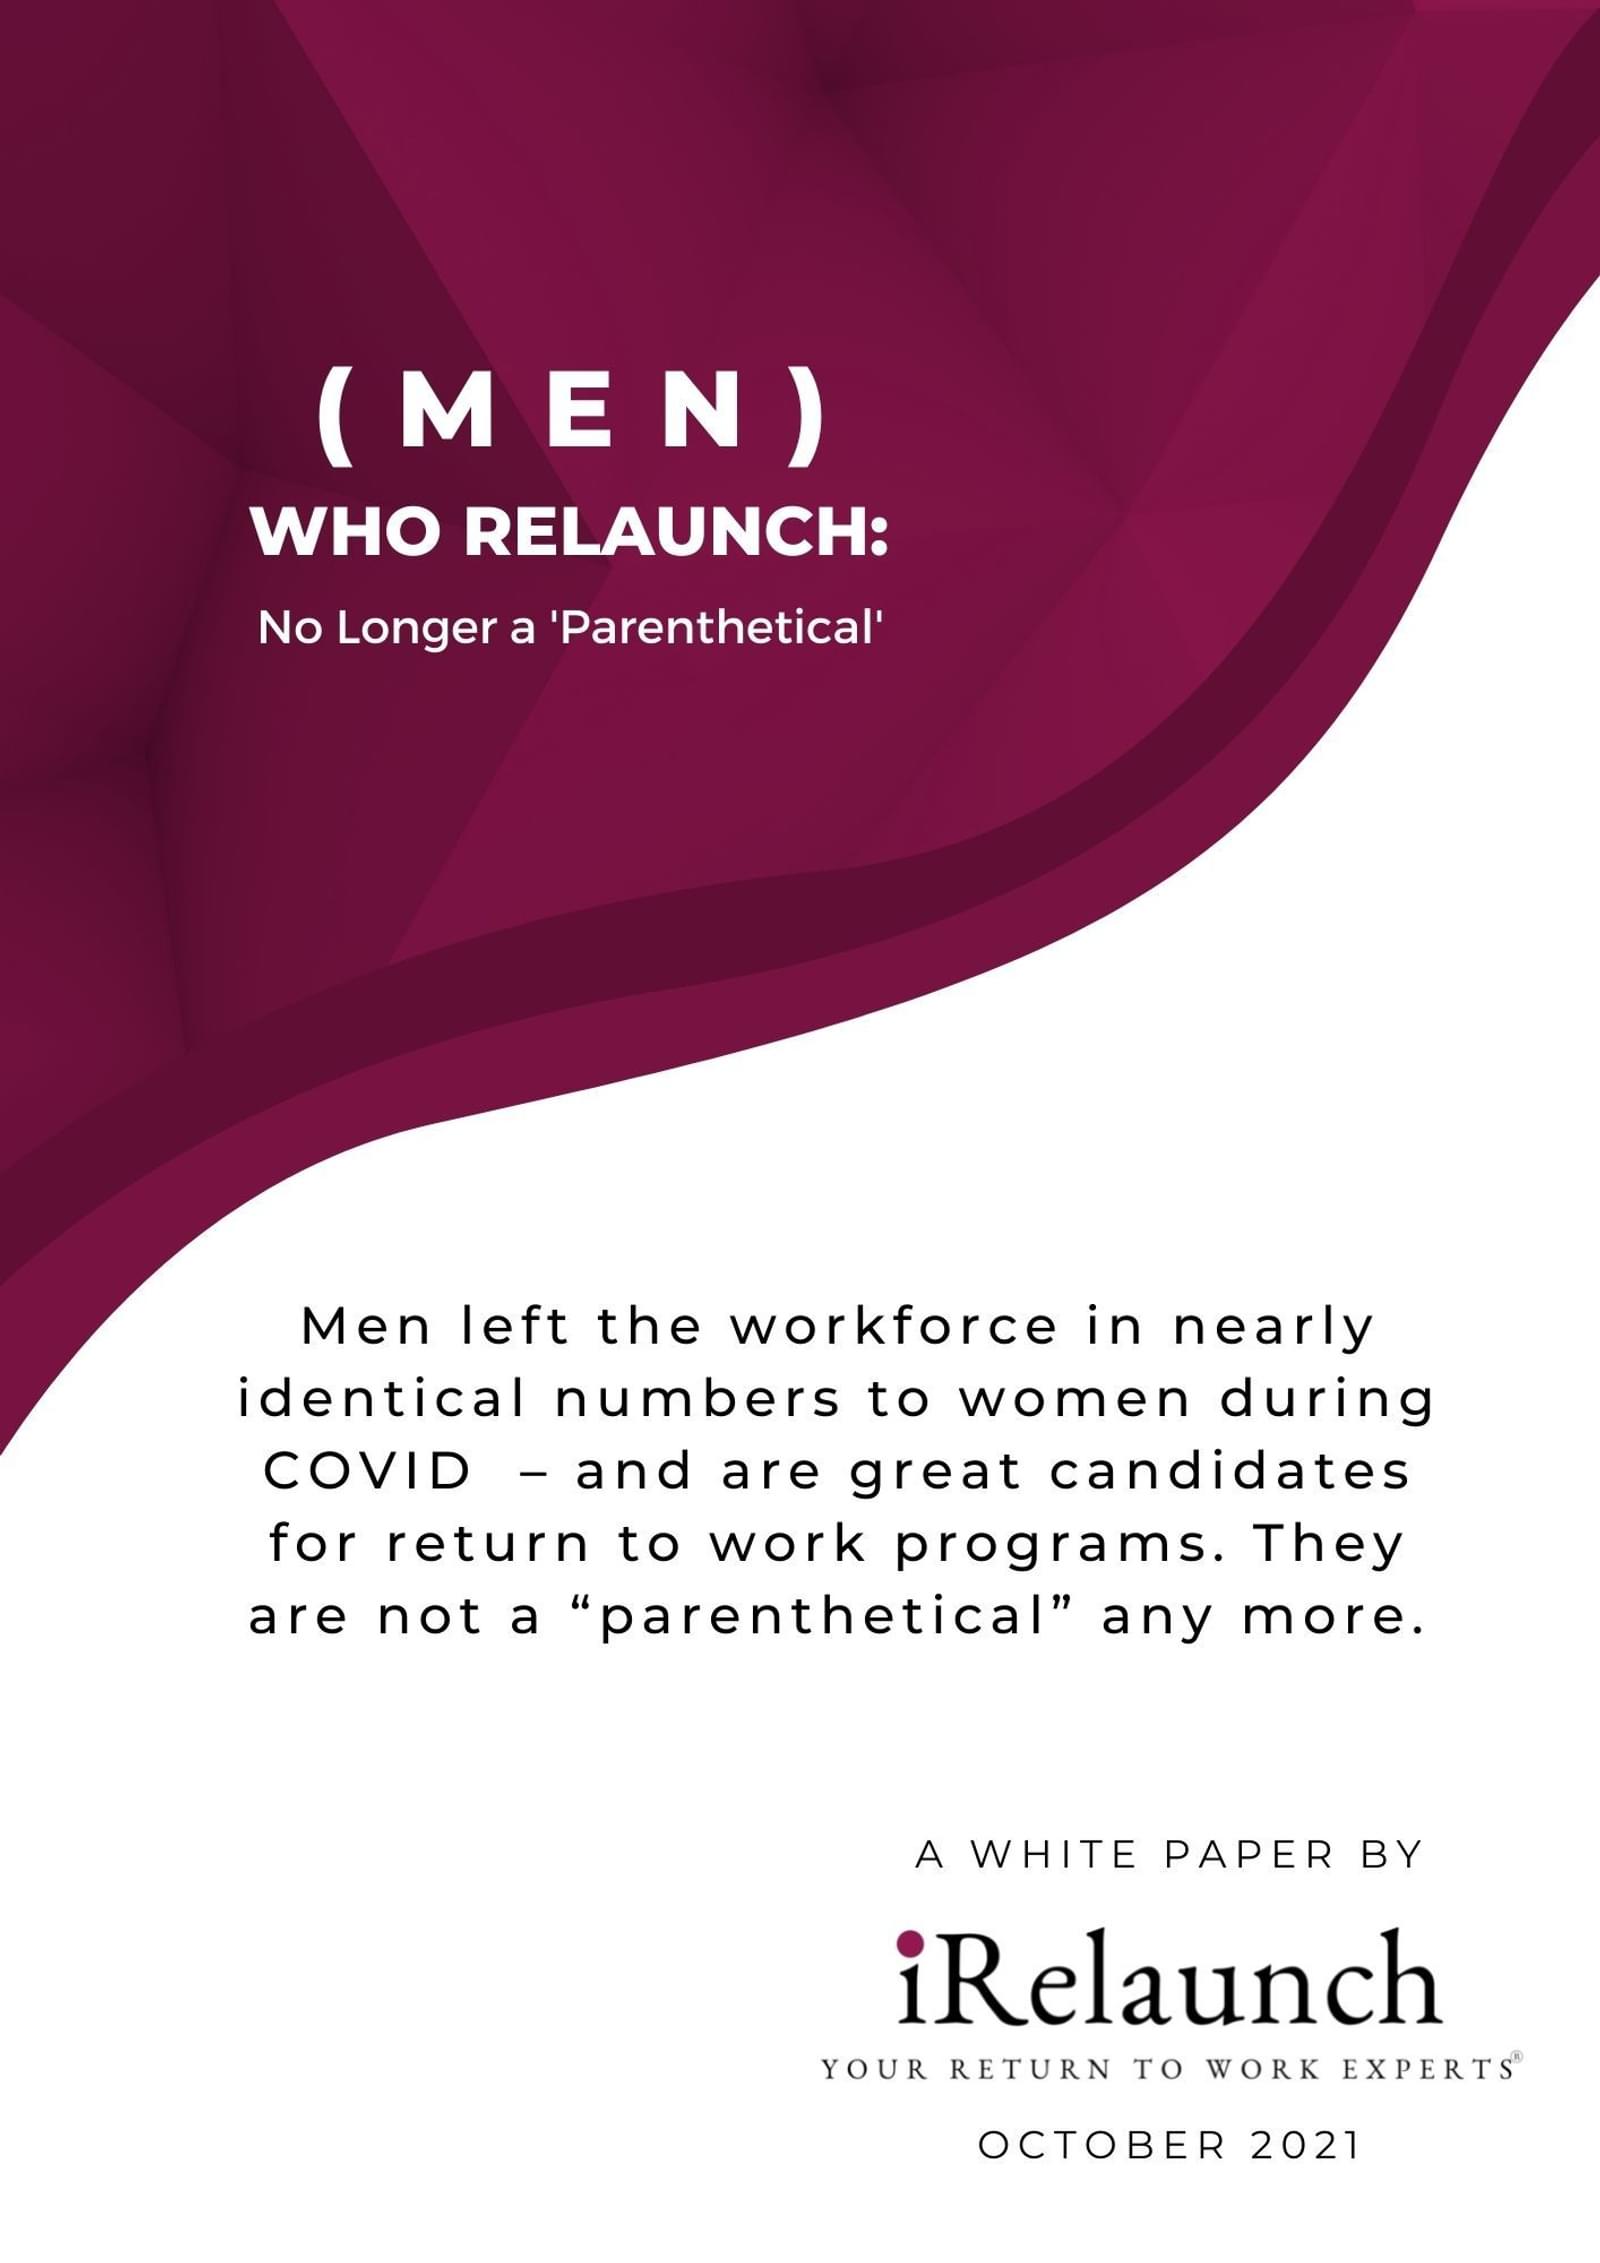 An image of te Cover Page for iRelaunch's October 2021 white paper entitled: (Men) Who Relaunch: No Longer a 'Parenthetical'